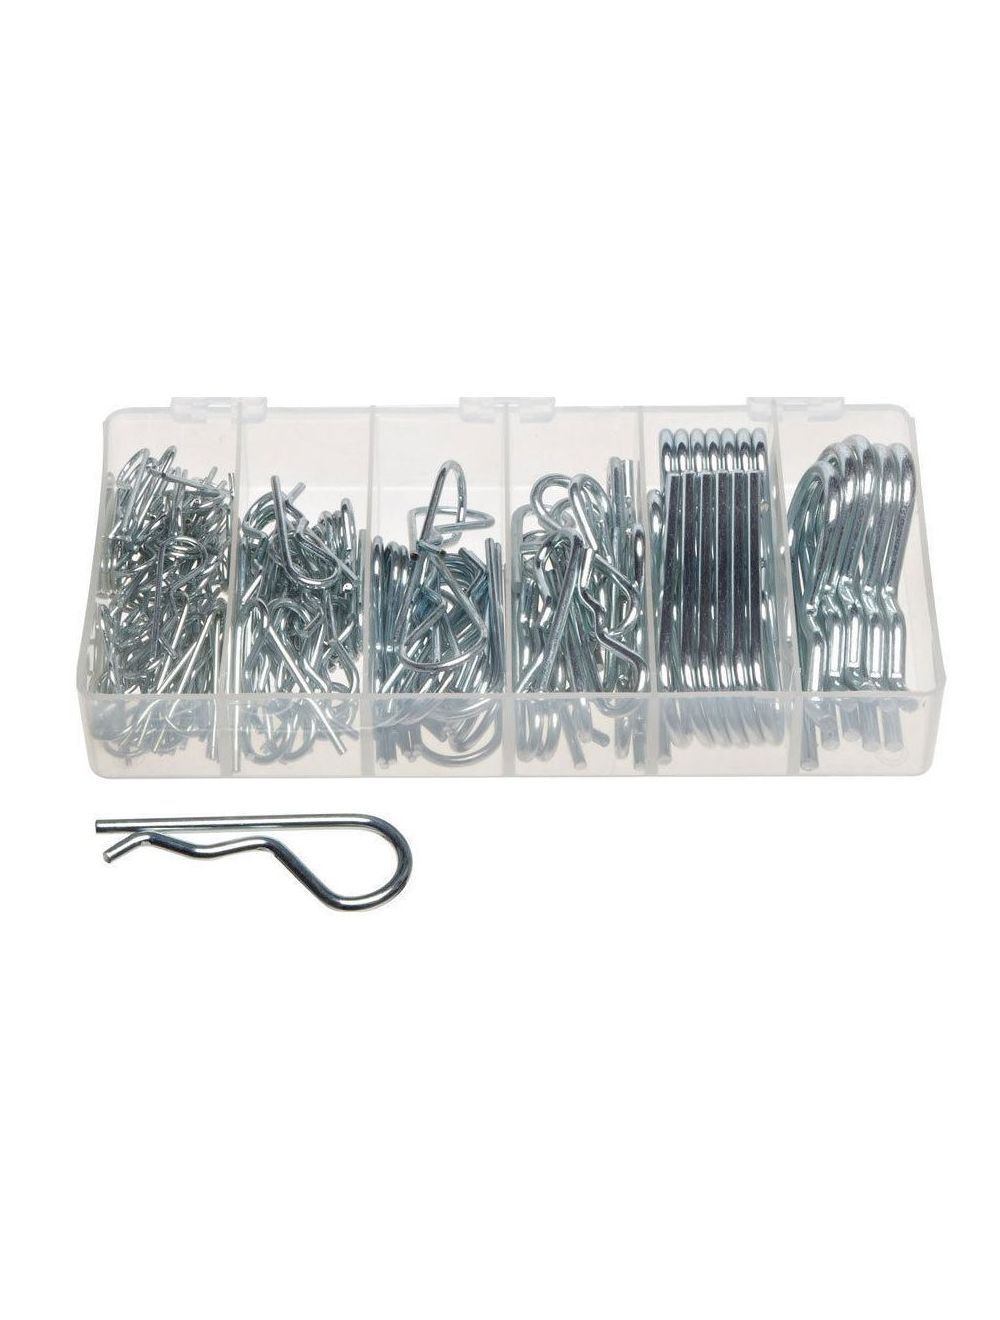 560pc GOLIATH INDUSTRIAL COTTER PIN ASSORTMENT CLIP KEY HARDWARE 